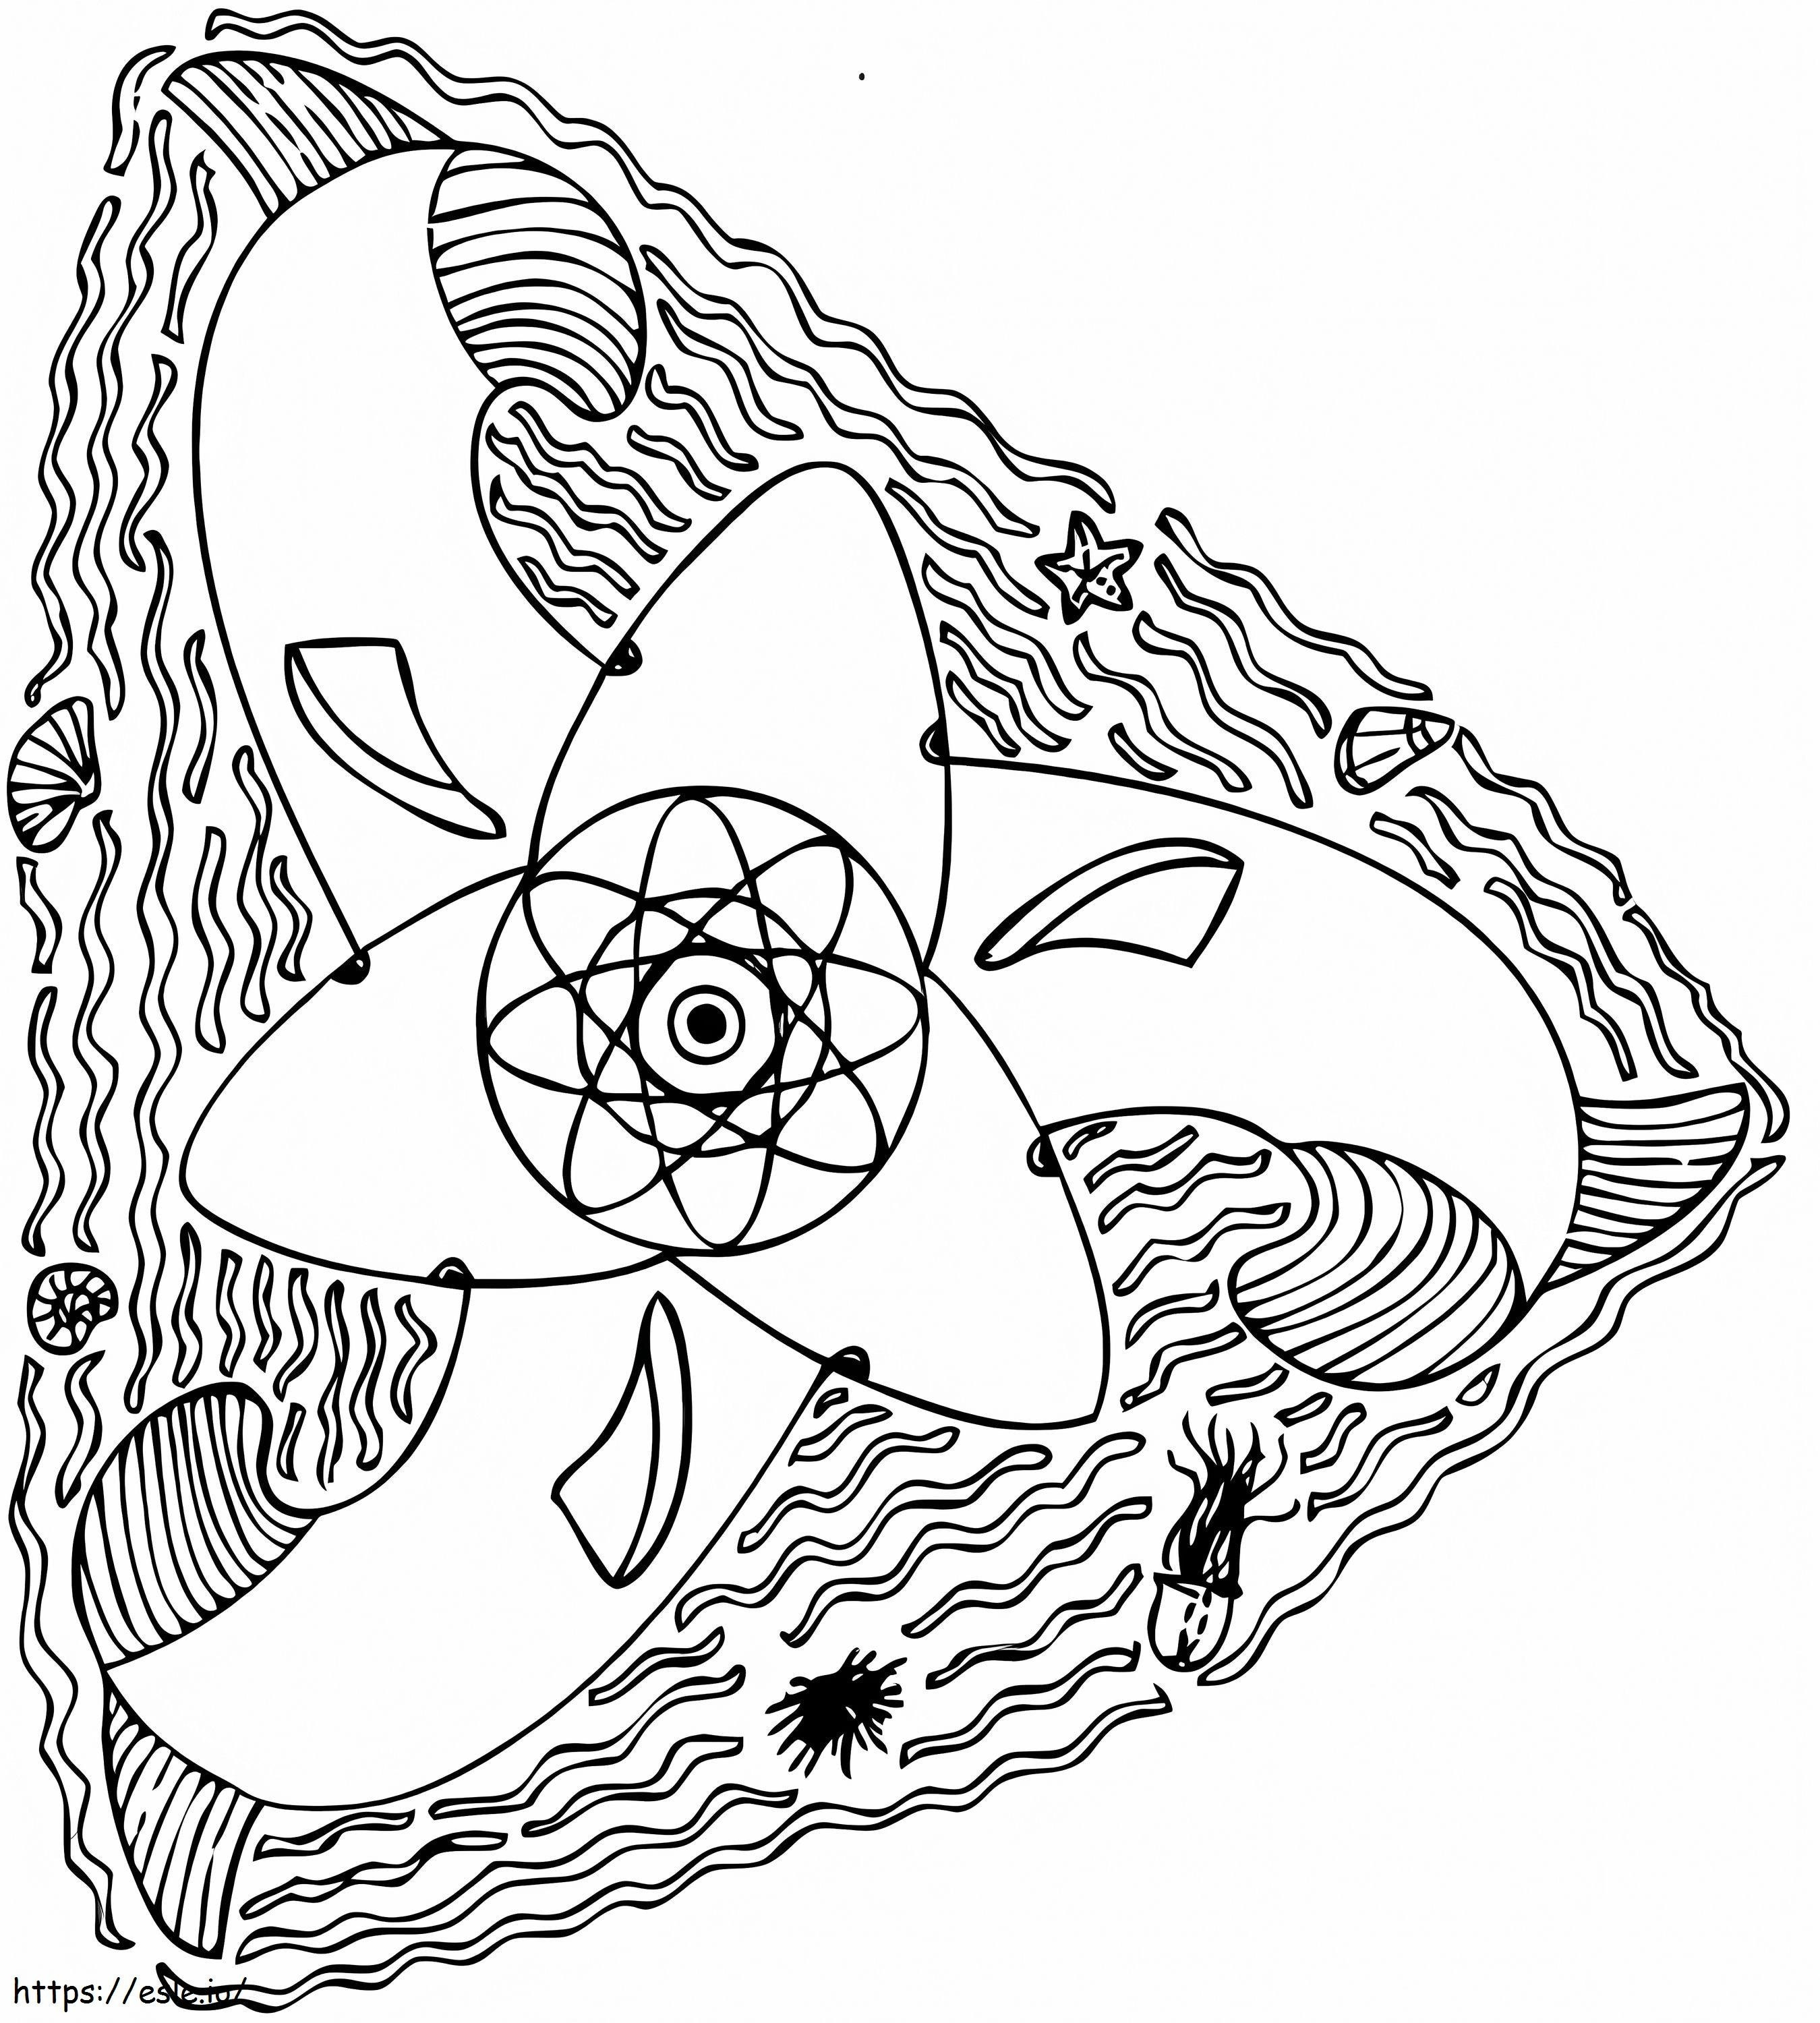 1562808675_Special Whale A4 coloring page